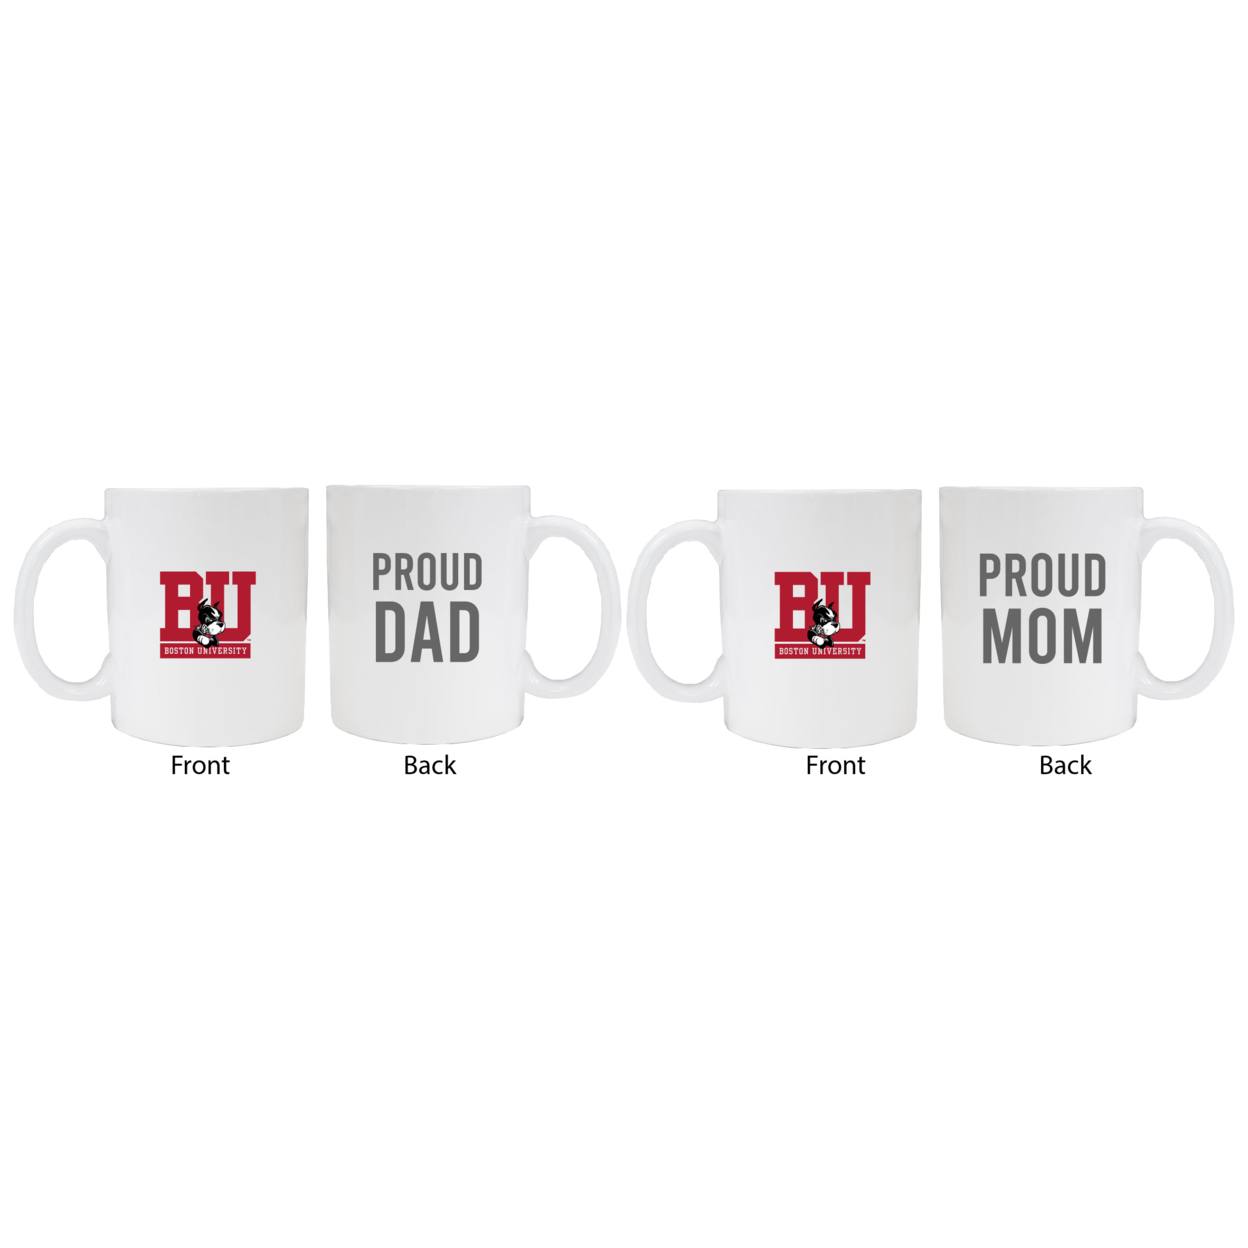 Boston Terriers Proud Mom And Dad White Ceramic Coffee Mug 2 Pack (White).